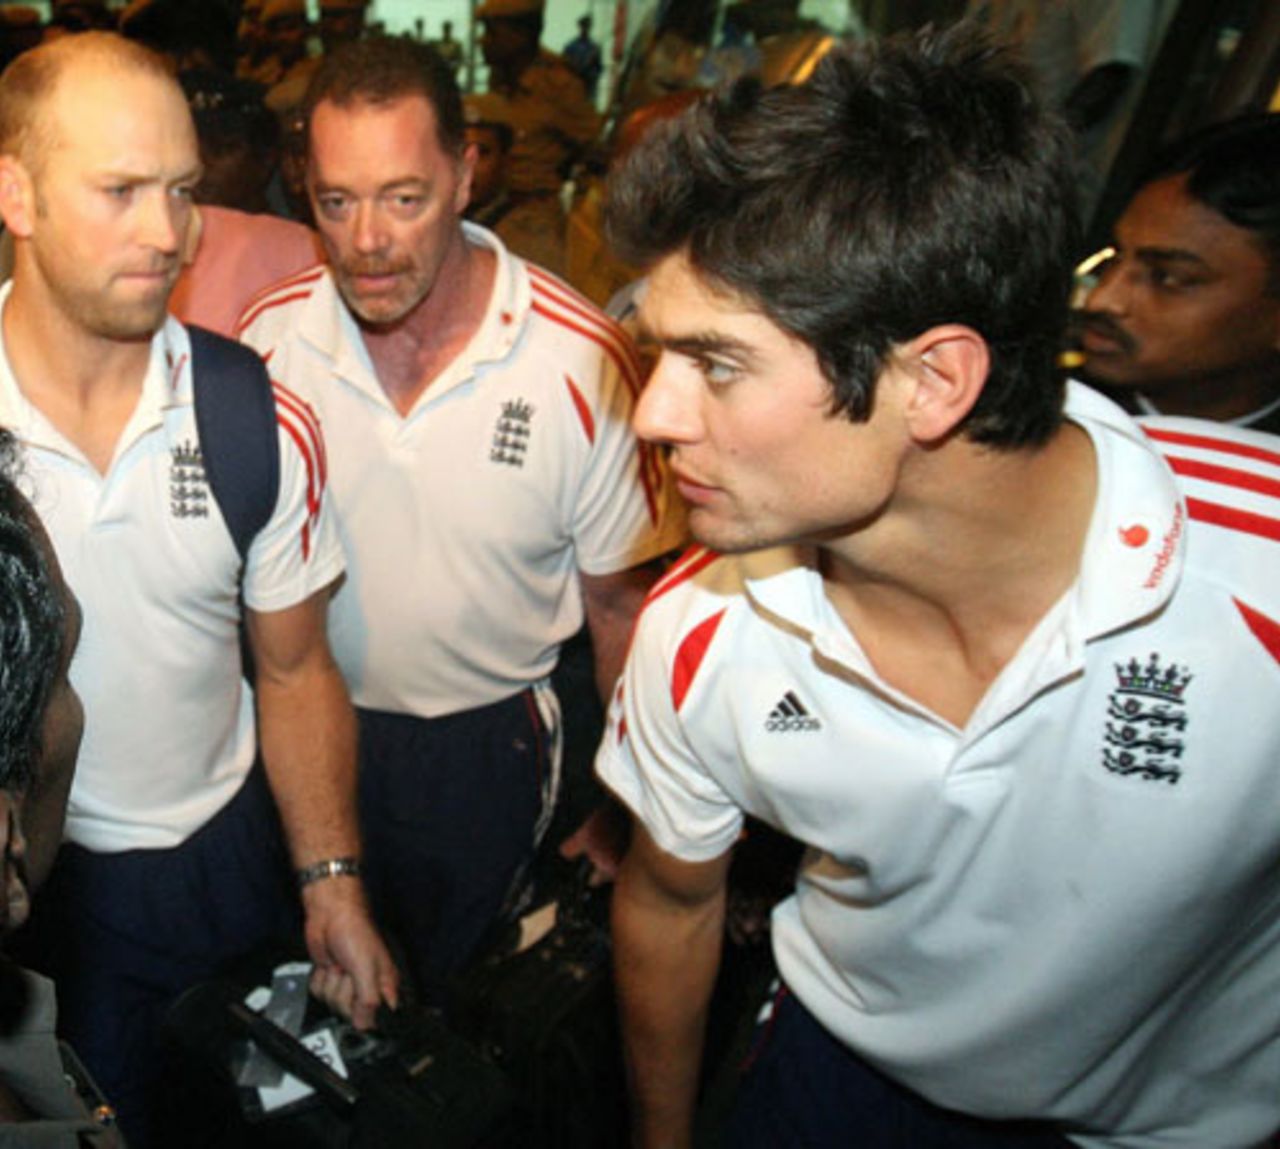 Matt Prior and Alastair Cook at the Chennai airport, December 8, 2008